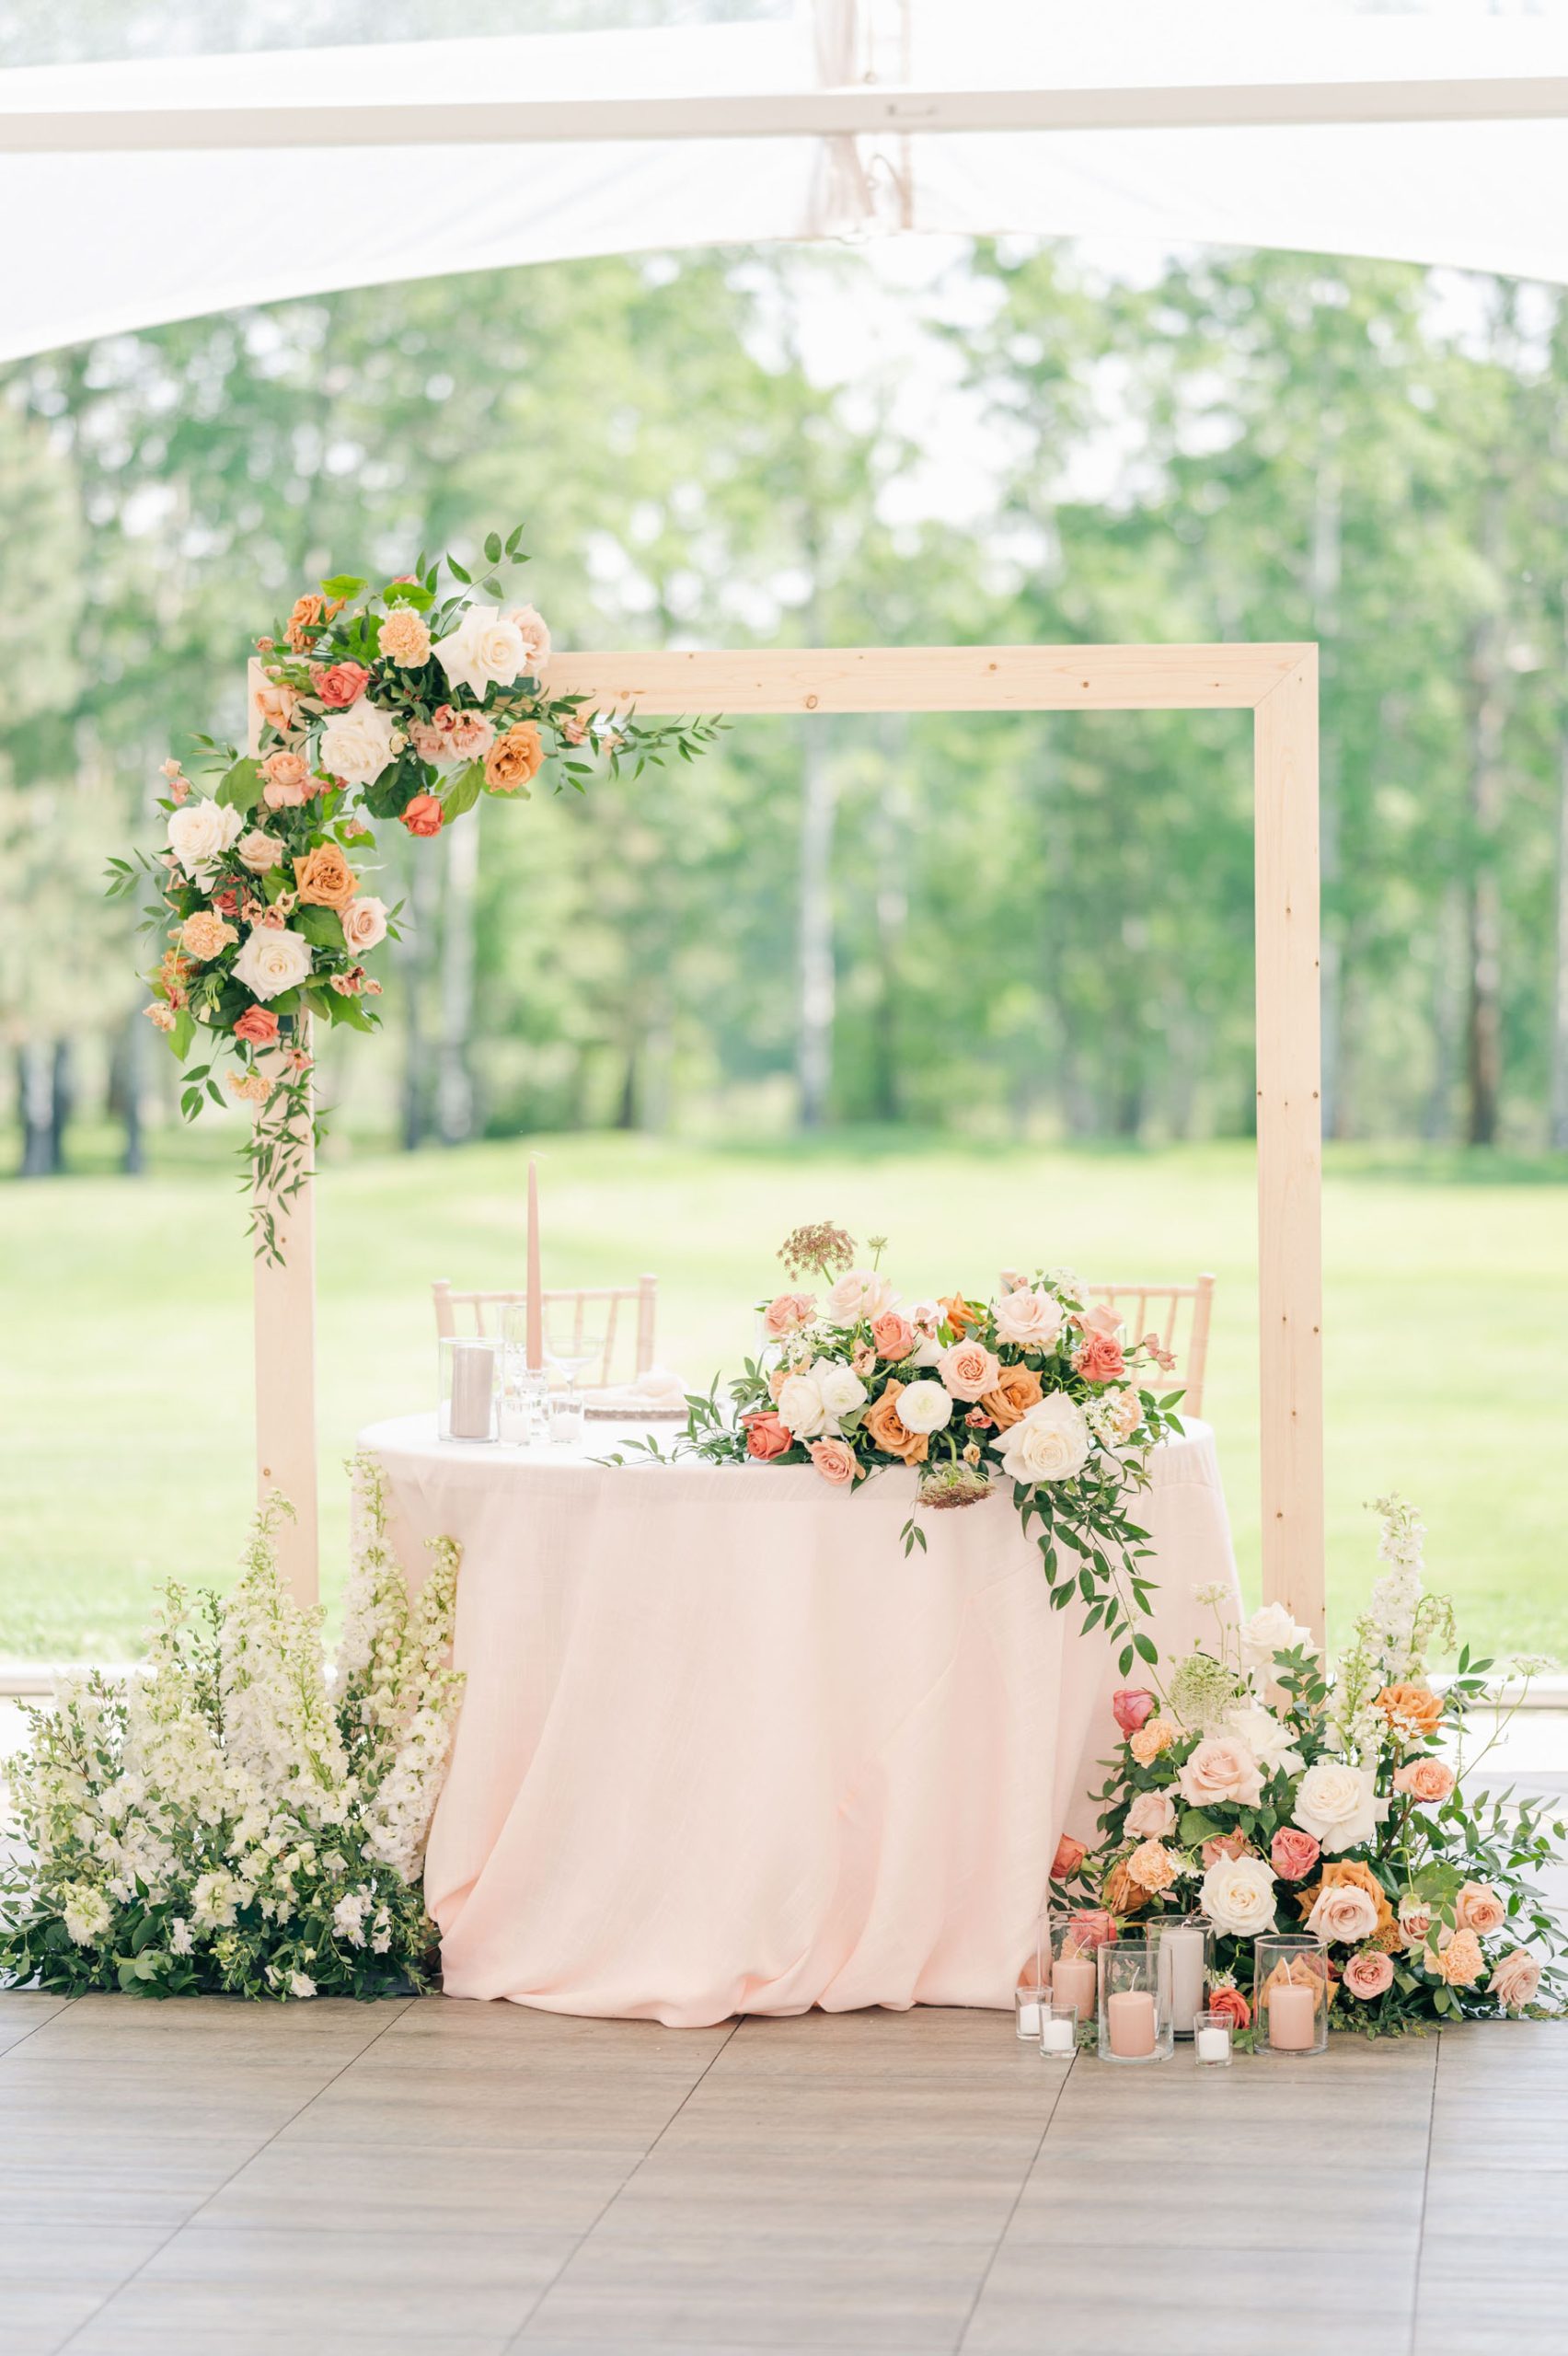 Wedding signing table with pastel and greenery floral installations